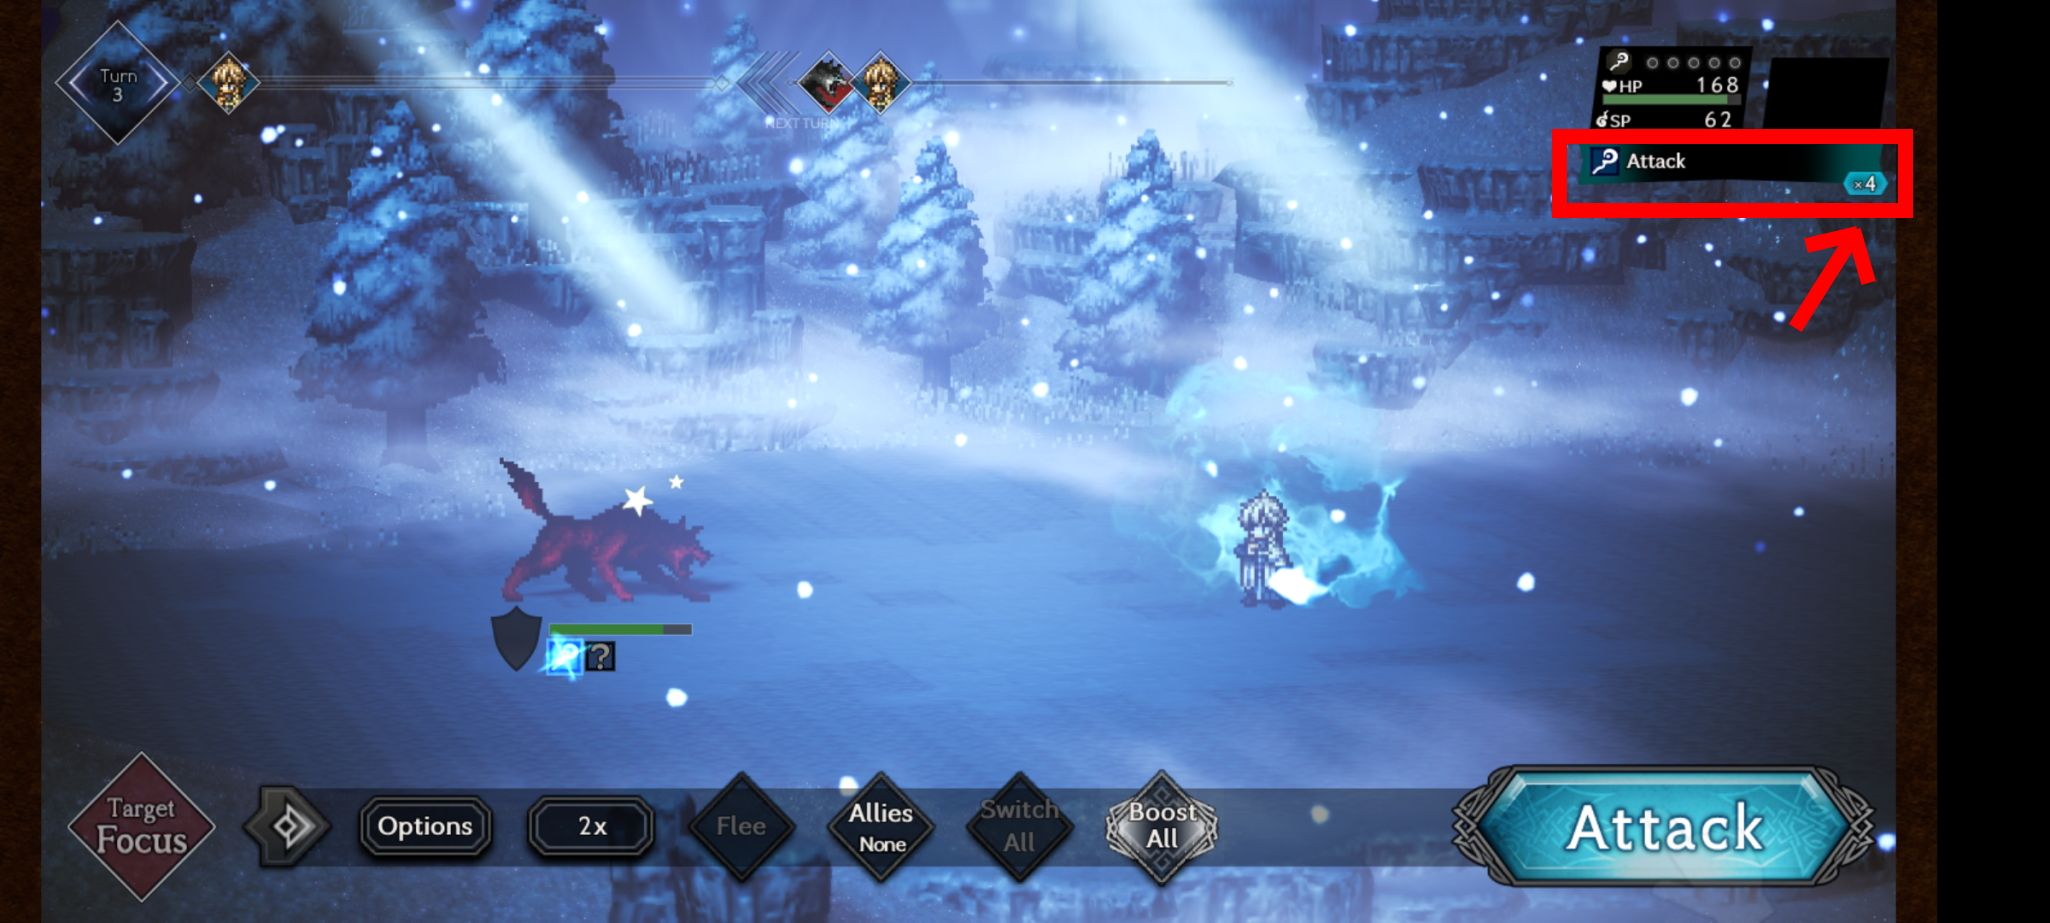 Octopath Traveler: Use boosts in Champions of the Continent